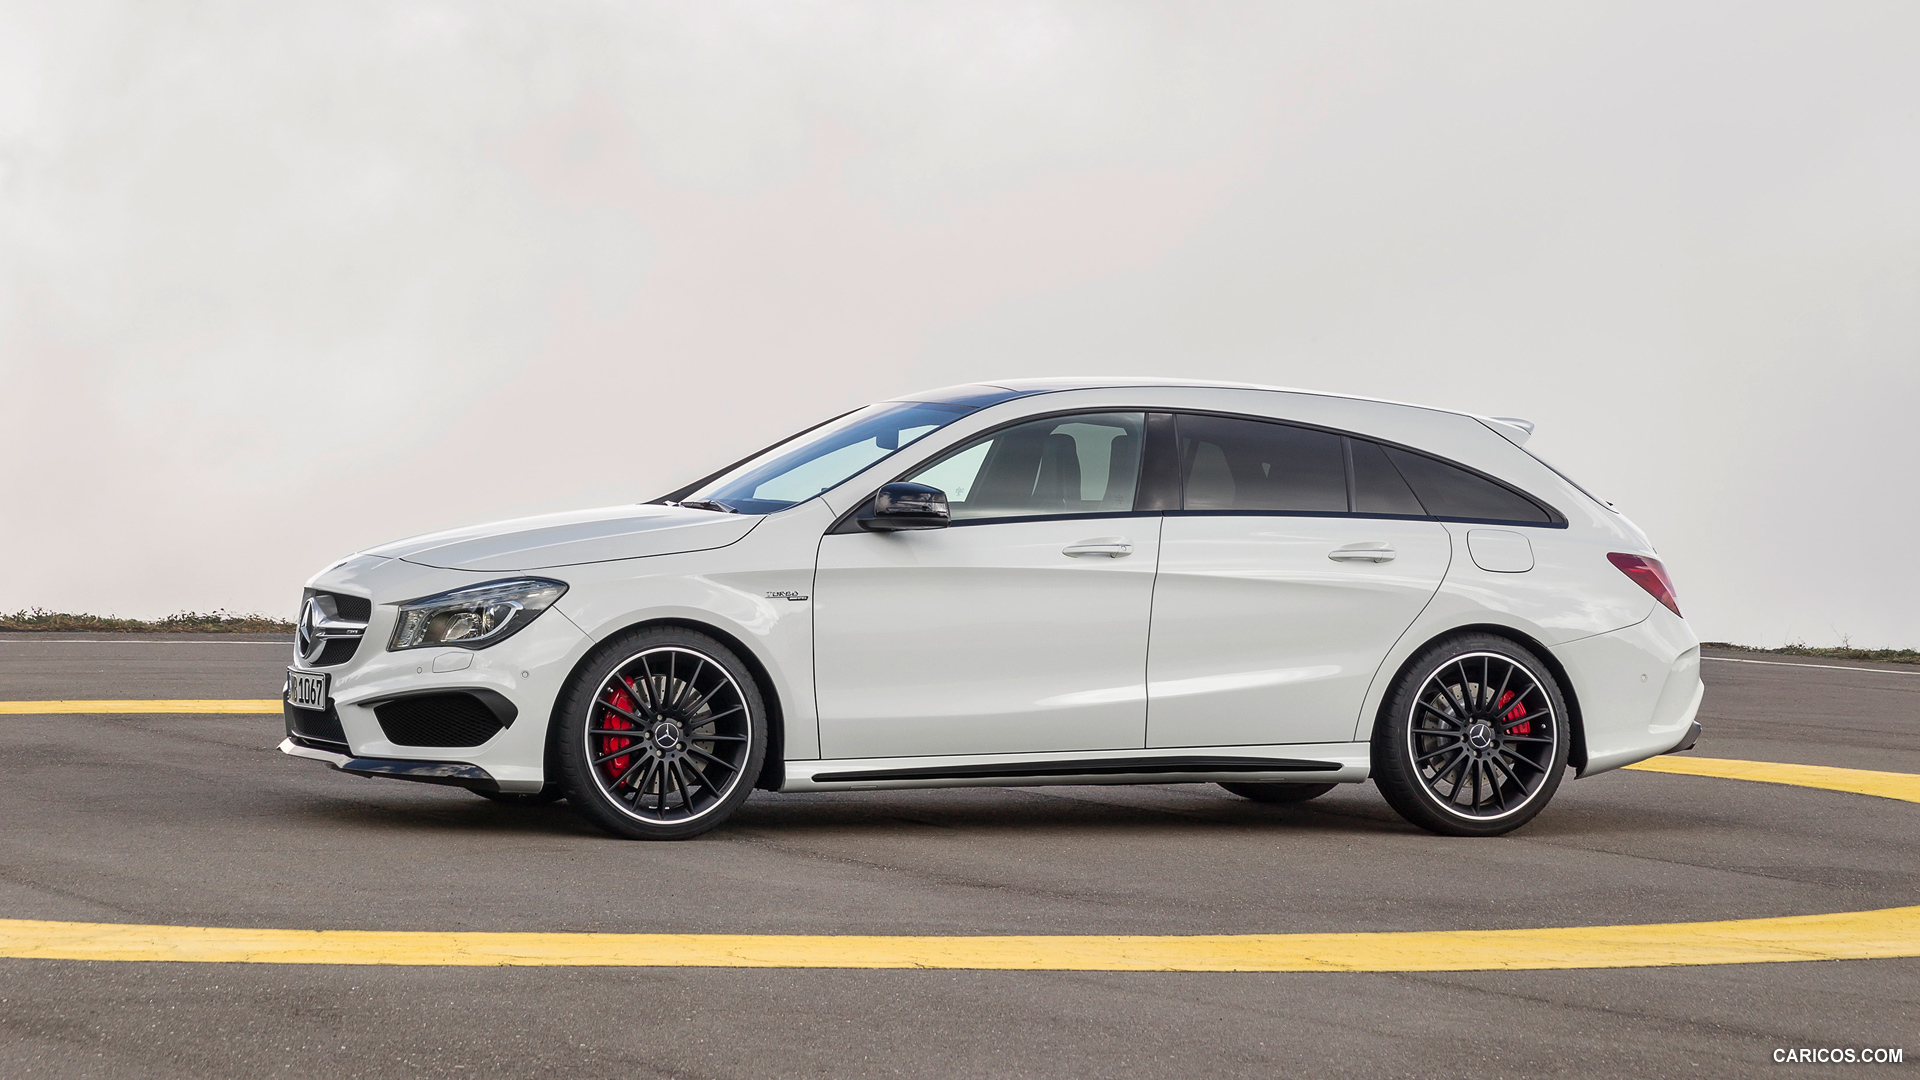 2015 Mercedes-Benz CLA 45 AMG Shooting Brake (Calcite White) - Side, #16 of 70